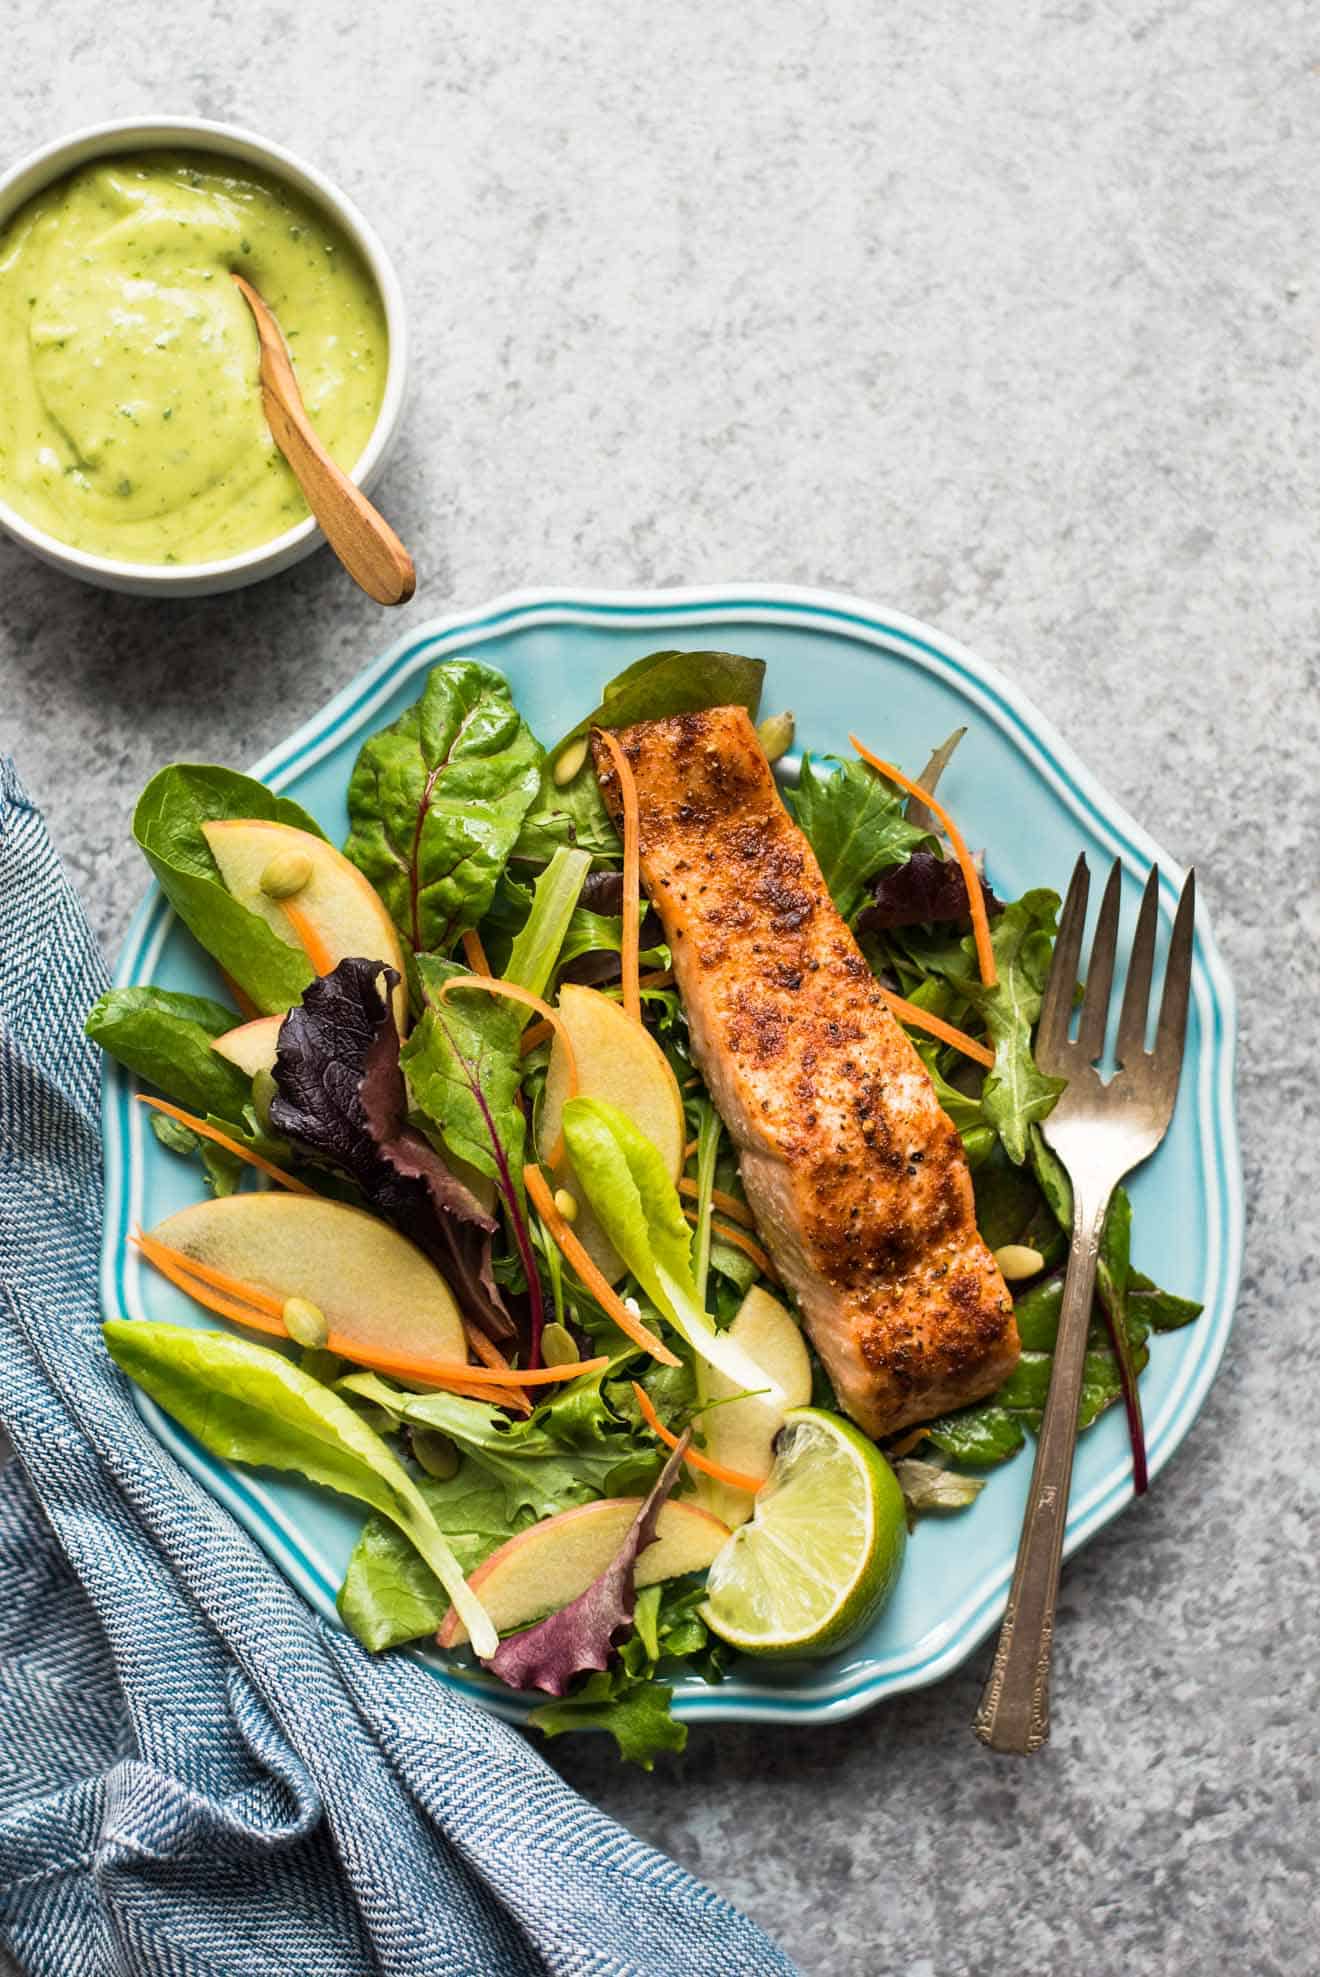 Cajun Spiced Baked Salmon with Avocado Lime Sauce - a healthy, gluten-free meal ready in under 30 minutes! by @healthynibs